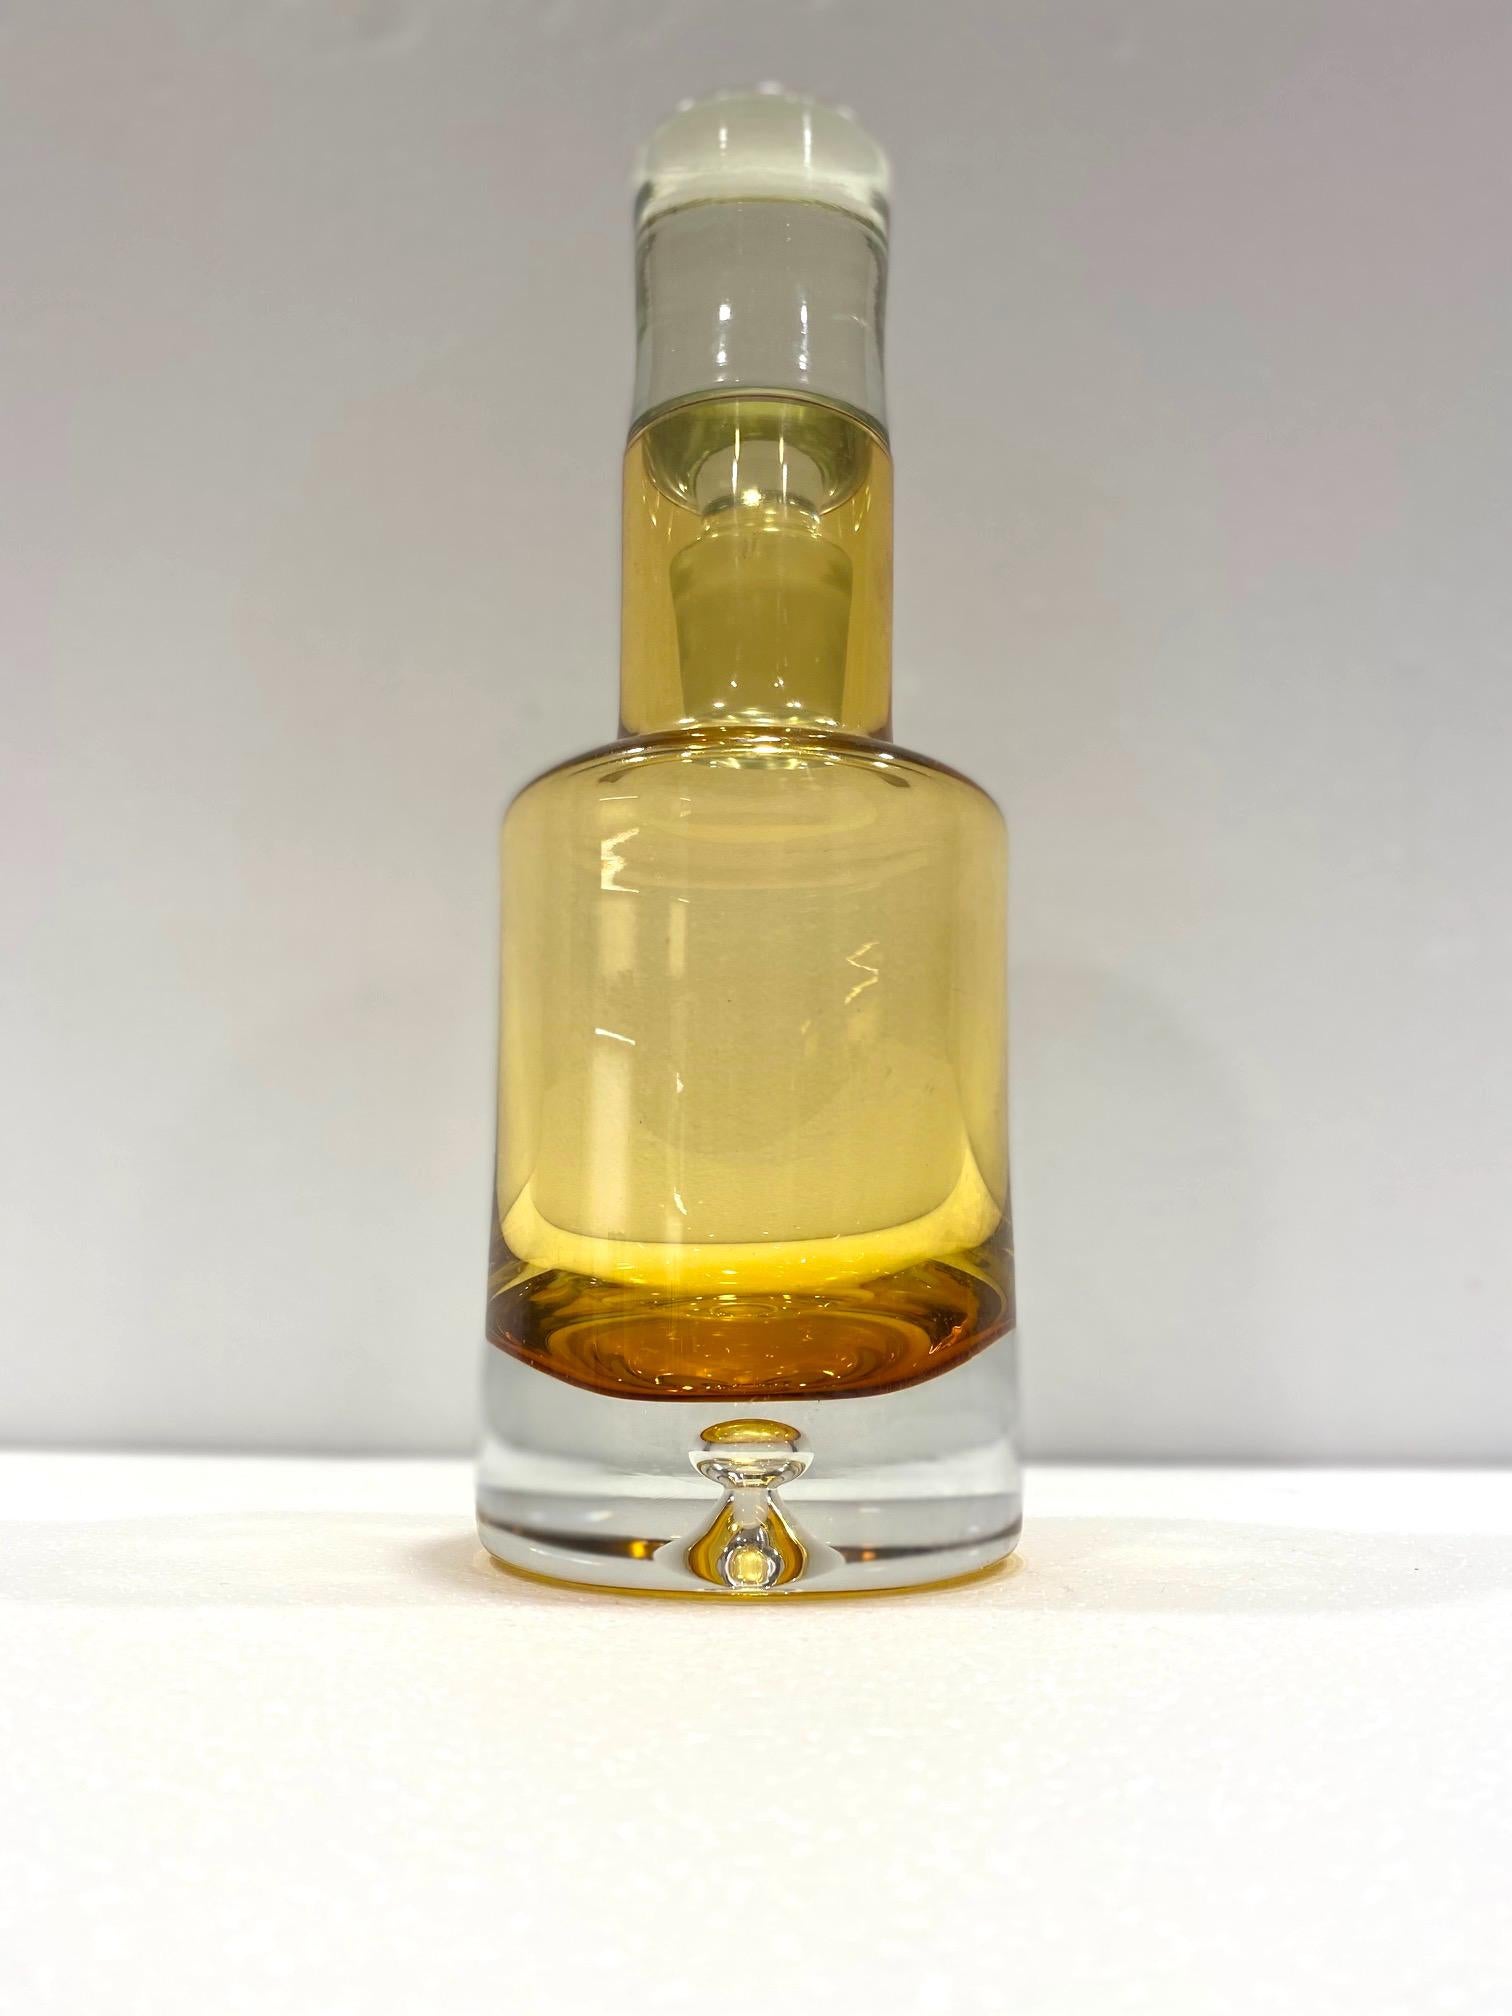 Vintage Scandinavian Modern spirits decanter in blown yellow glass. The decanter is made of heavyset chunky glass with a streamline form. It features a clear glass base with large center bubble detail and gradient glass moving from hues of amber